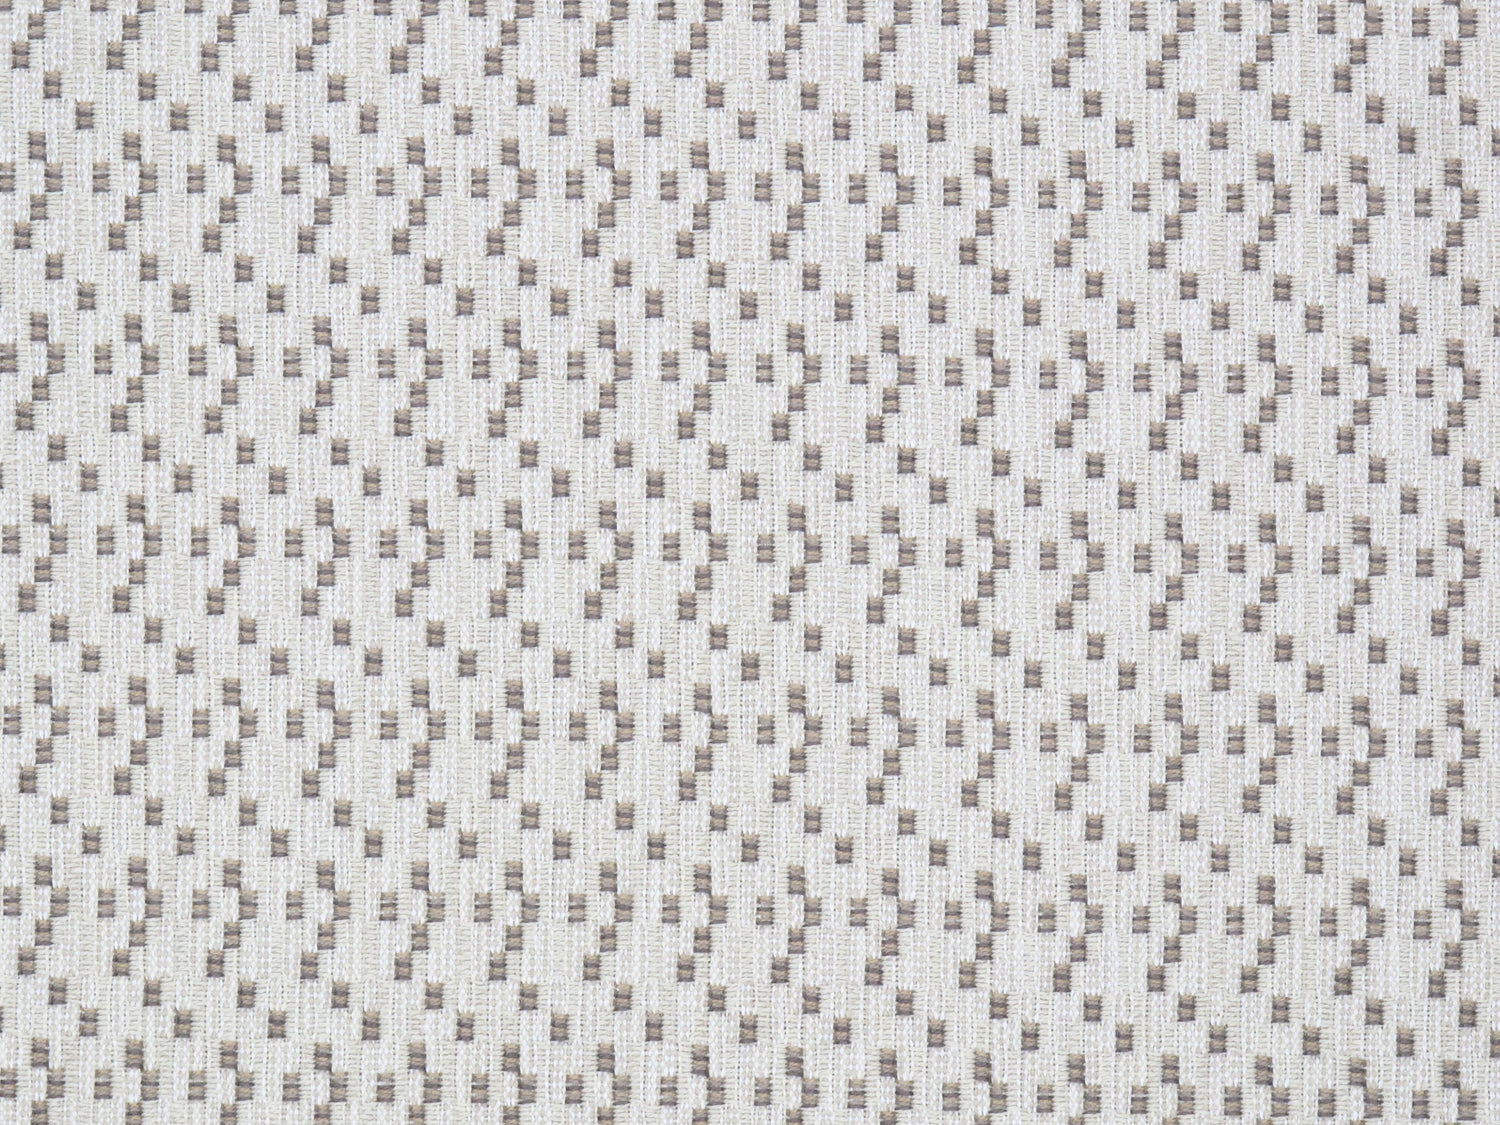 Norita fabric in harbor mist color - pattern number SU 00024597 - by Scalamandre in the Old World Weavers collection